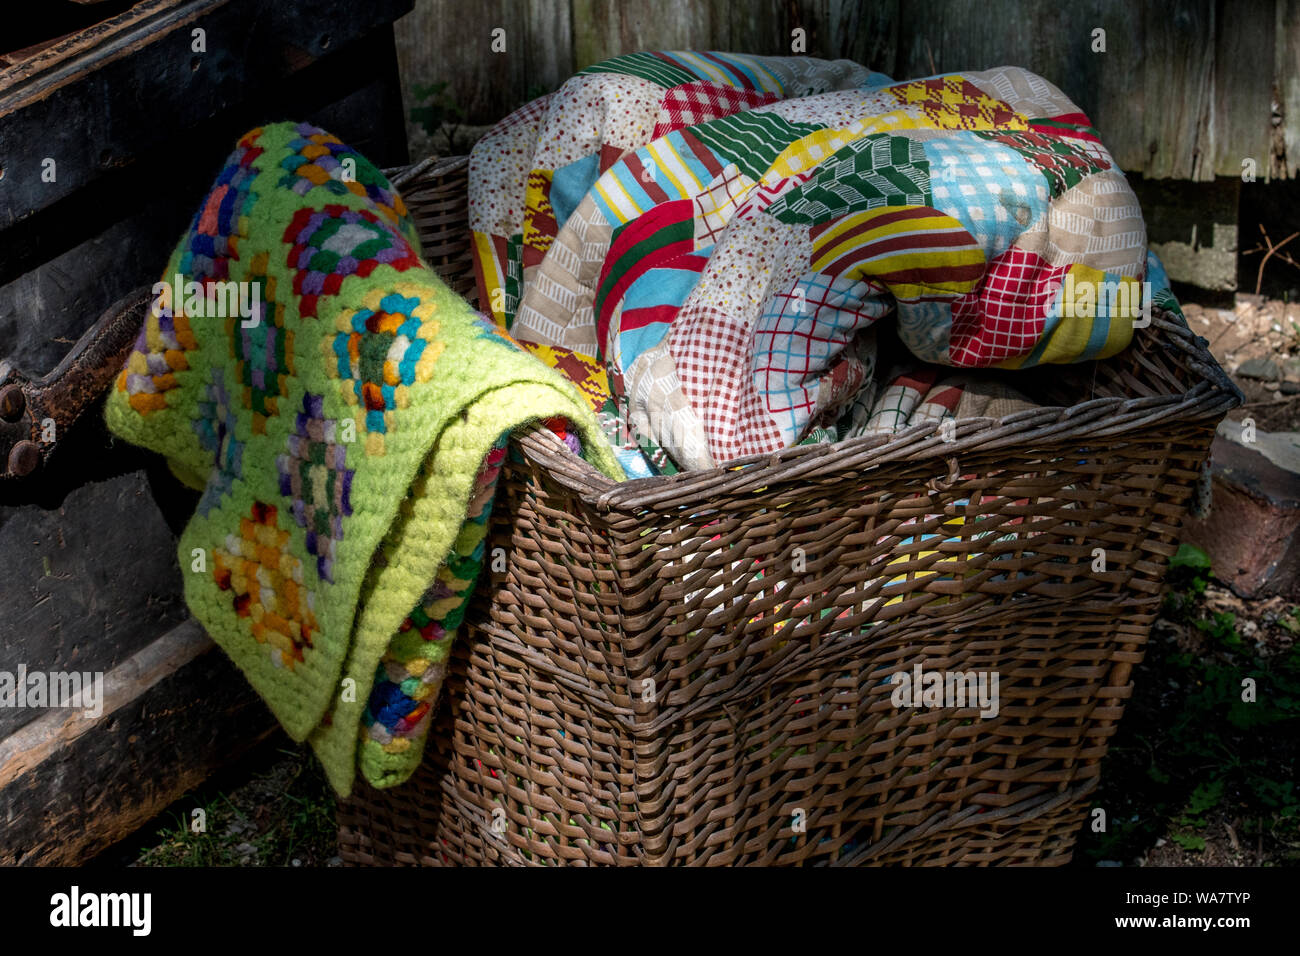 old wicker basket filled with hand made quilts and blankets Stock Photo